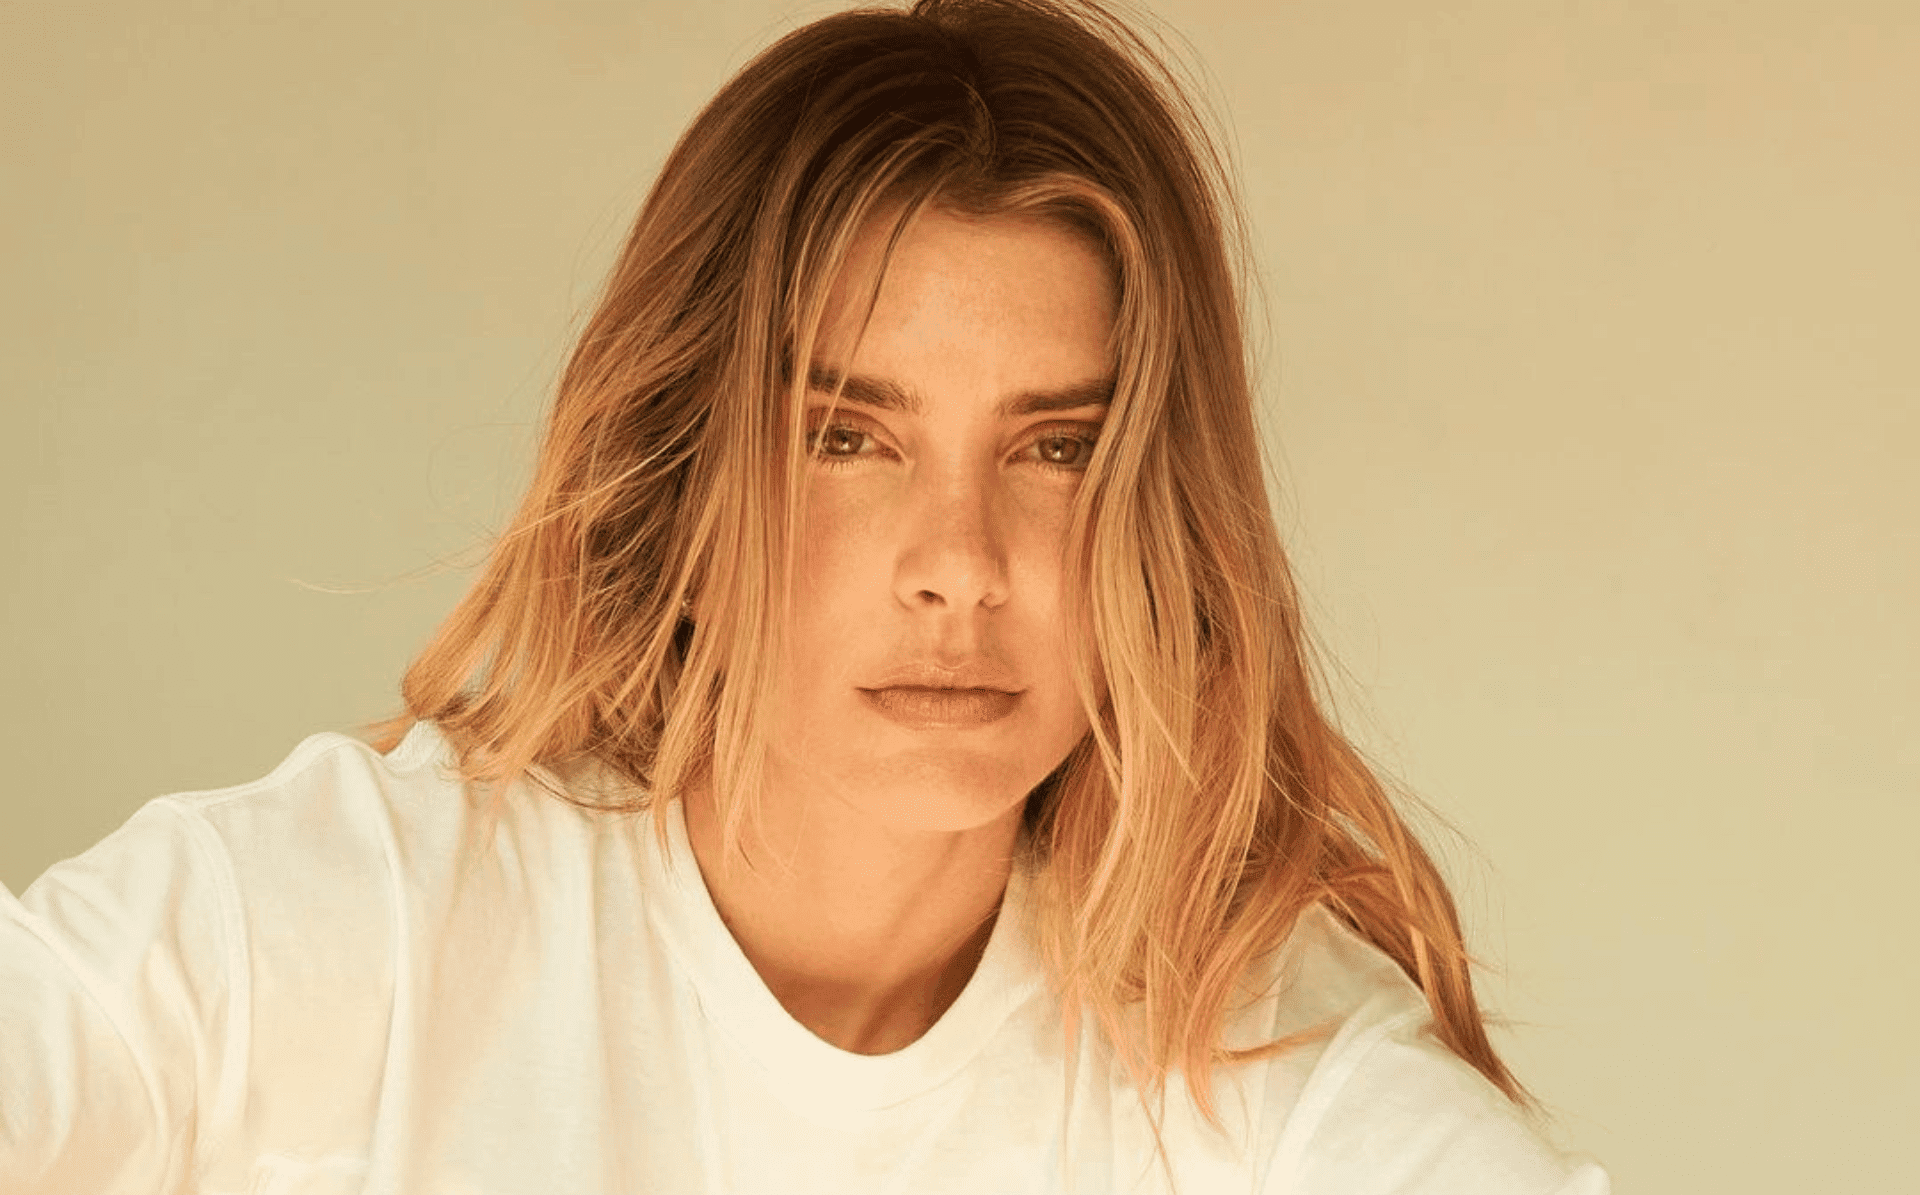 Supermodel and CEO of wellness brand KAPOWDER, Valentina Ferrer looks at the camera, wearing a white tee and her blonde hair down over her shoulders.